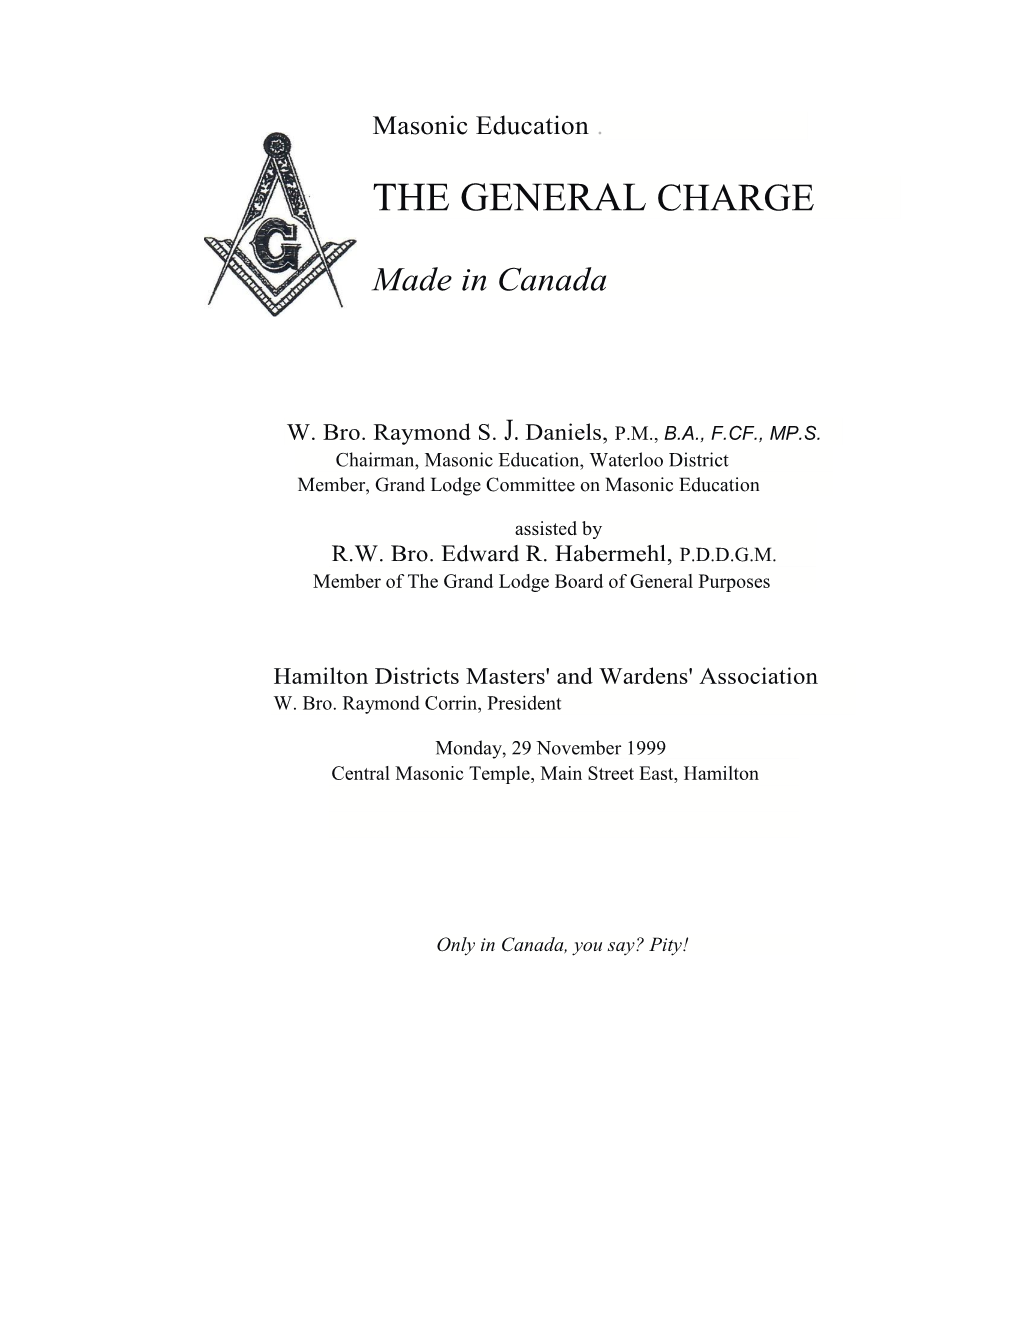 The General Charge